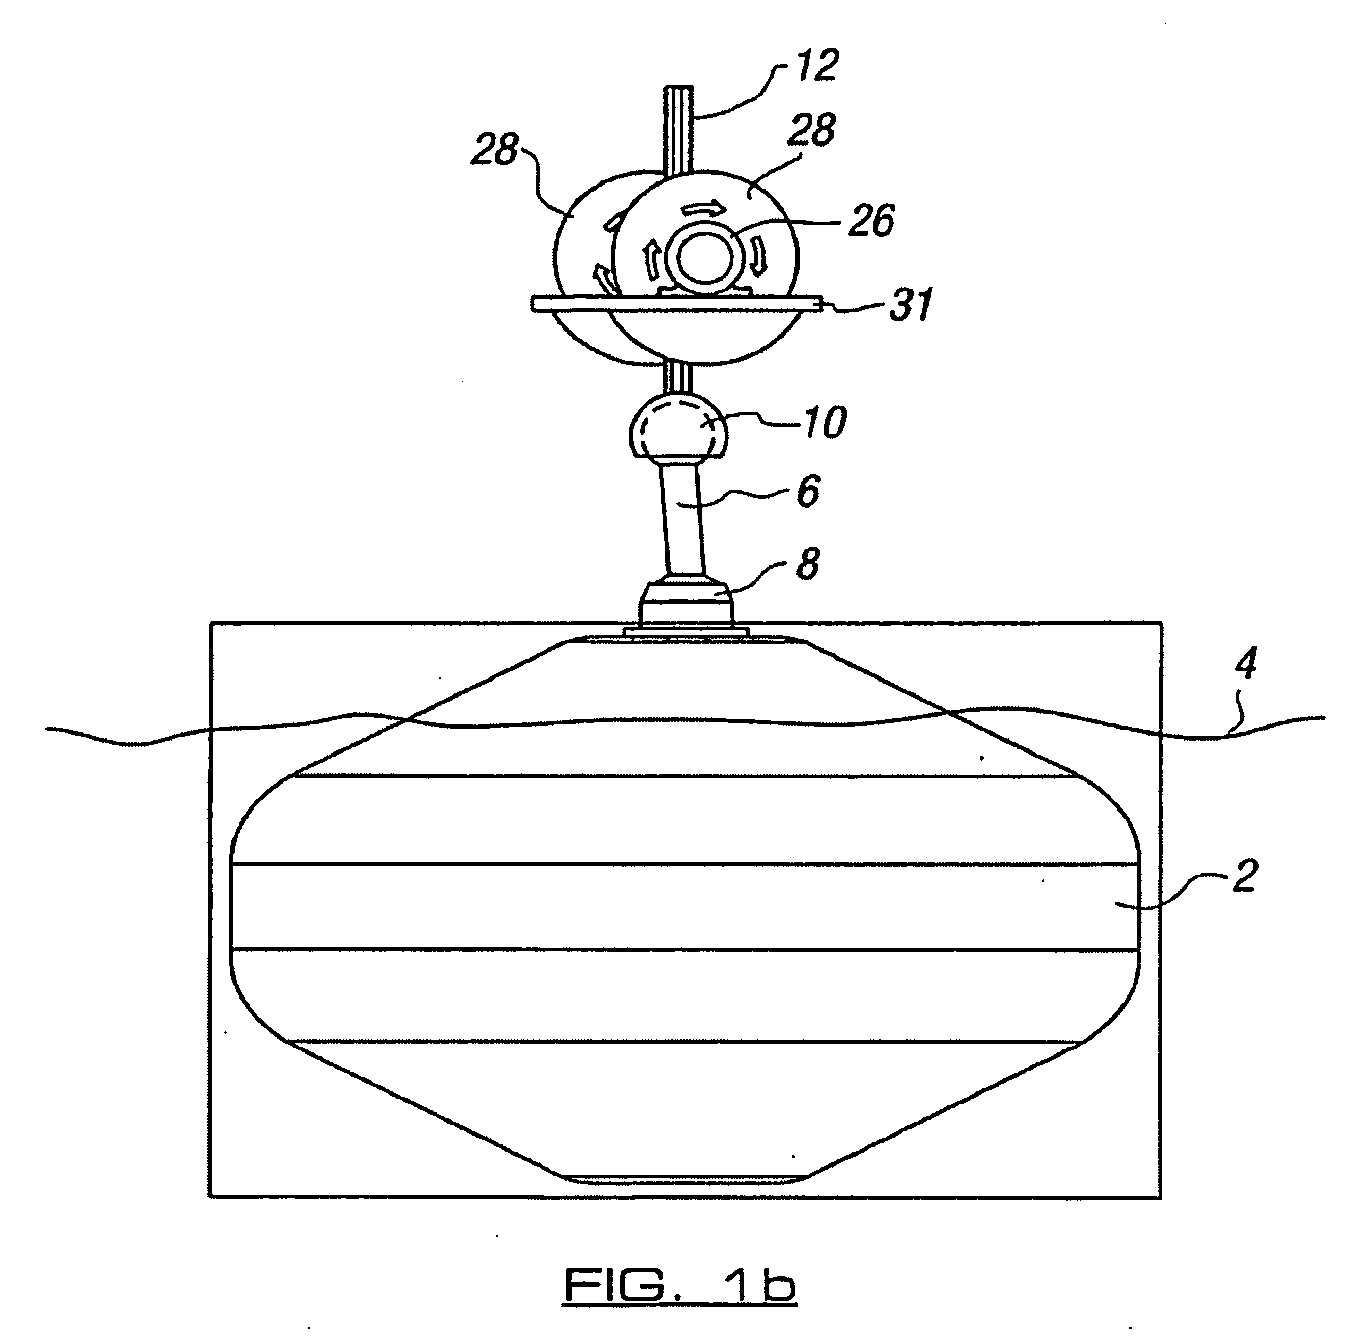 Movement and power generation apparatus